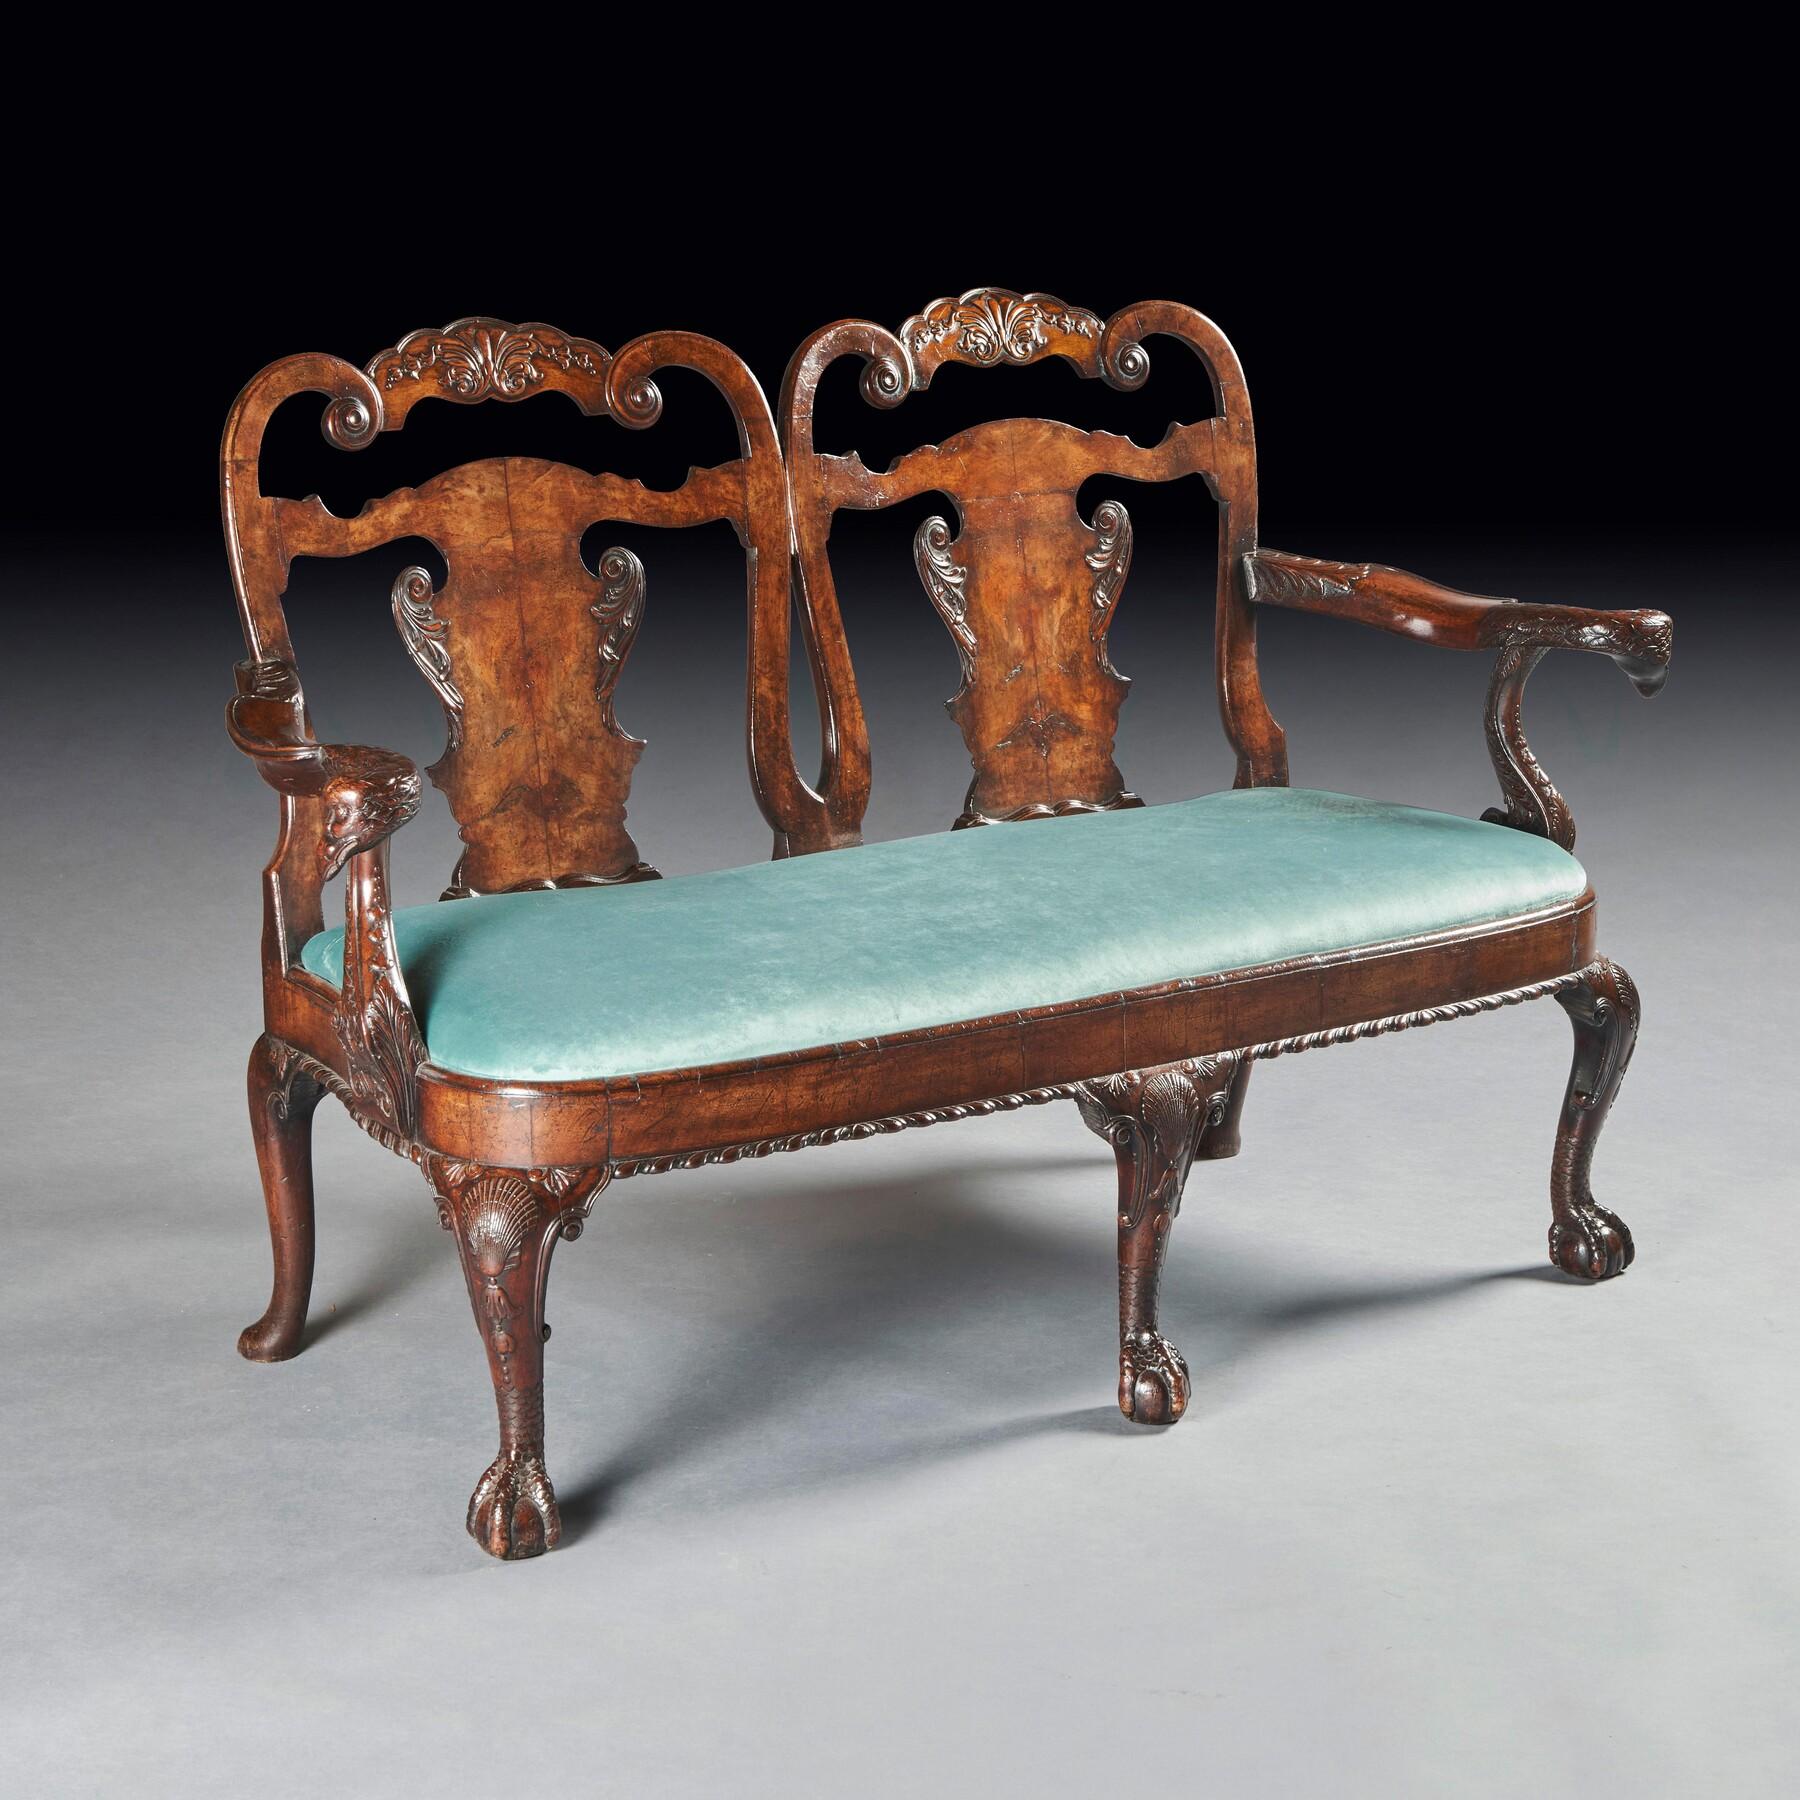 A superb quality late 19th century walnut double chair back sofa / settee after a George II design of Giles Grendey’s .

English Circa 1880.

A wonderful sofa having scroll back supports with carved crestings above vase shaped splats with segmented